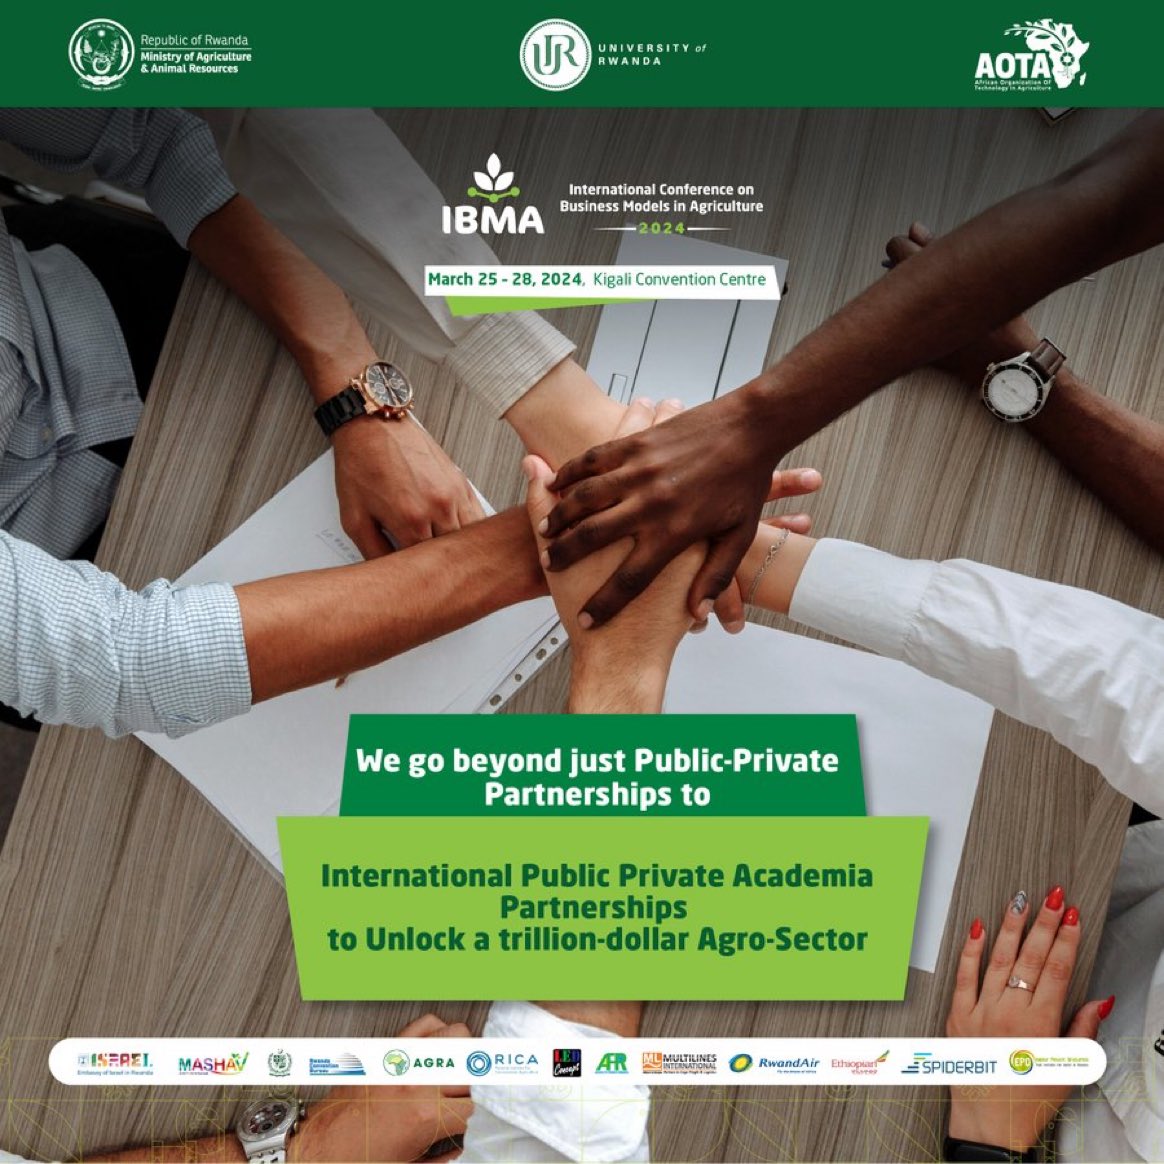 Did you know that #IBMA is powered by very strategic international #Public #Private #Academia #Partnerships (PPAP) forged through IBMA's parent org AOTA? 

Join us tomorrow as we create synergies btw govt, business, tech & research to innovate #agribusiness #models #IBMA2024